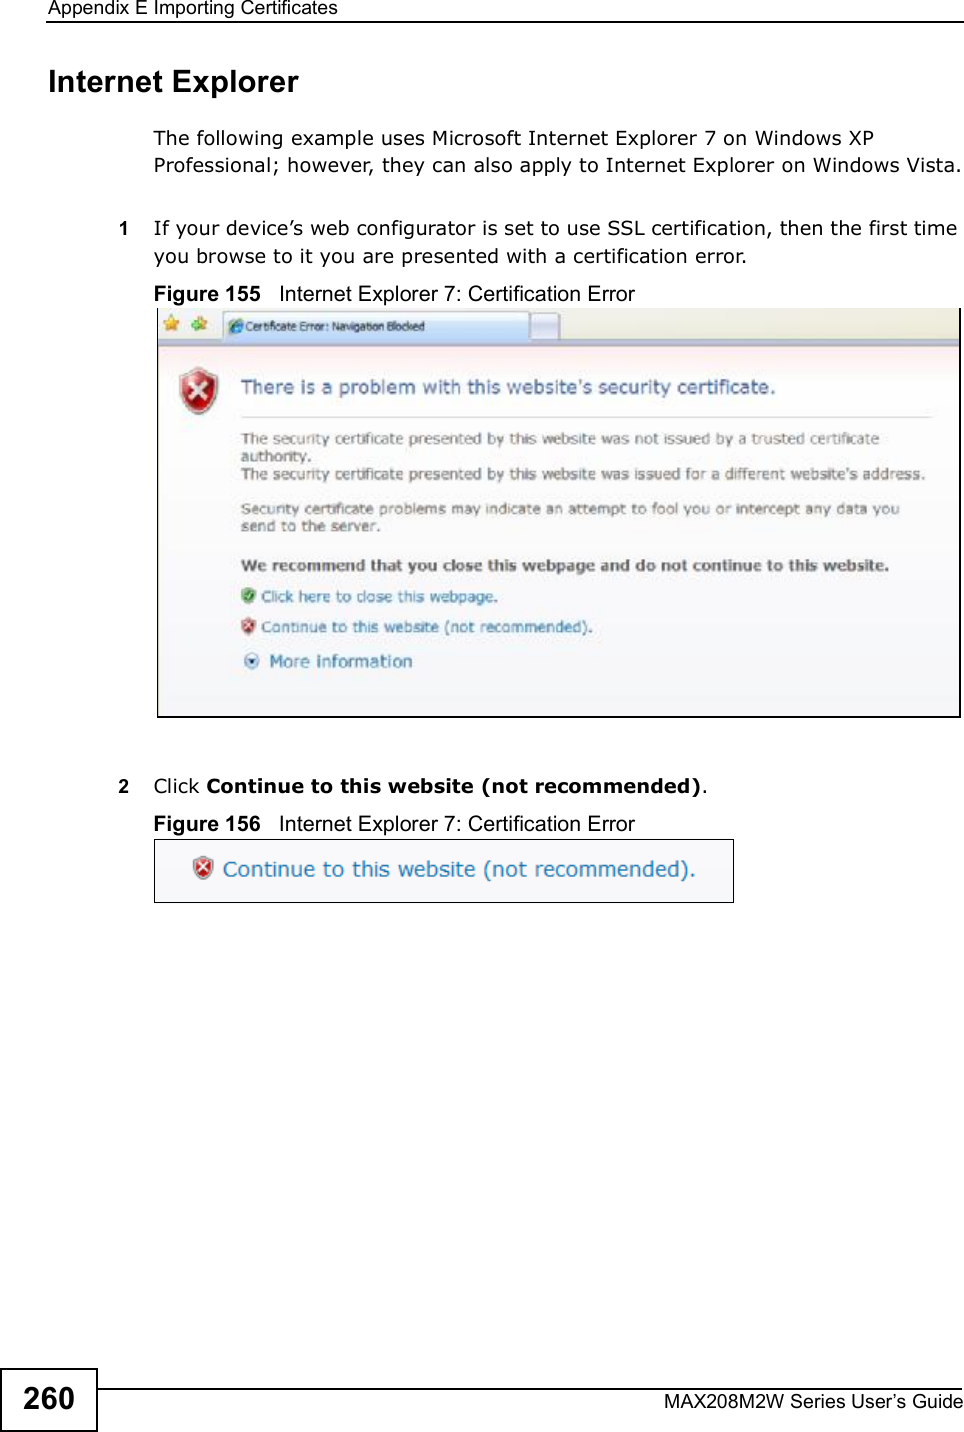 Appendix EImporting CertificatesMAX208M2W Series User s Guide260Internet ExplorerThe following example uses Microsoft Internet Explorer 7 on Windows XP Professional; however, they can also apply to Internet Explorer on Windows Vista.1If your device s web configurator is set to use SSL certification, then the first time you browse to it you are presented with a certification error.Figure 155   Internet Explorer 7: Certification Error2Click Continue to this website (not recommended).Figure 156   Internet Explorer 7: Certification Error